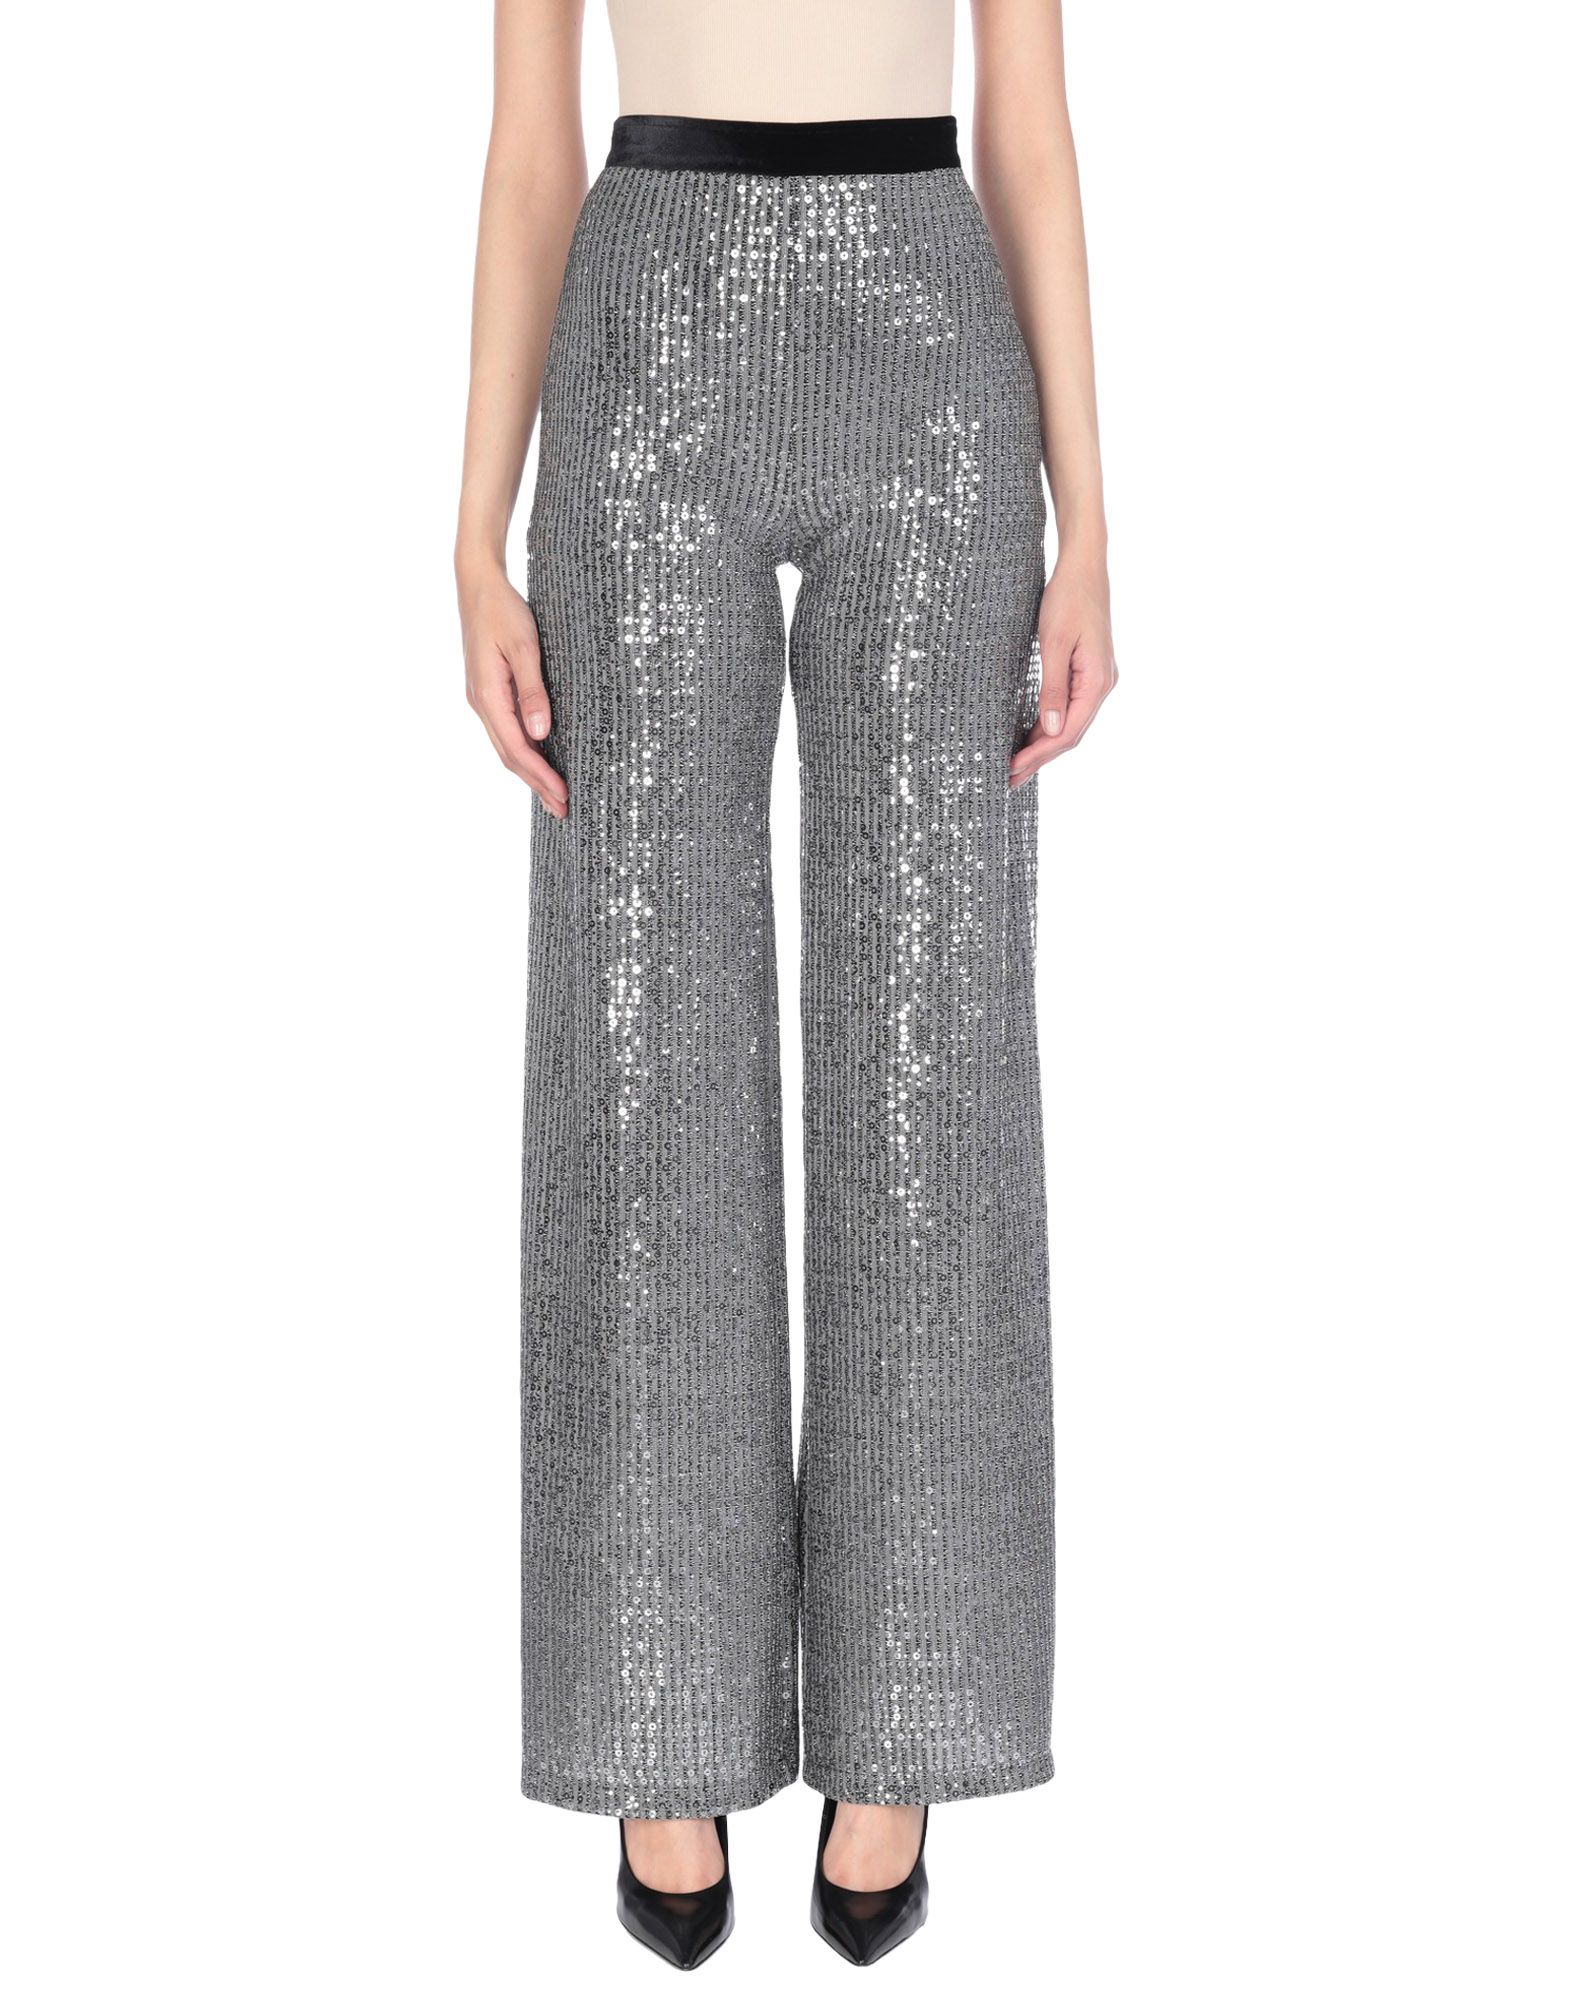 FACE TO FACE STYLE Pants